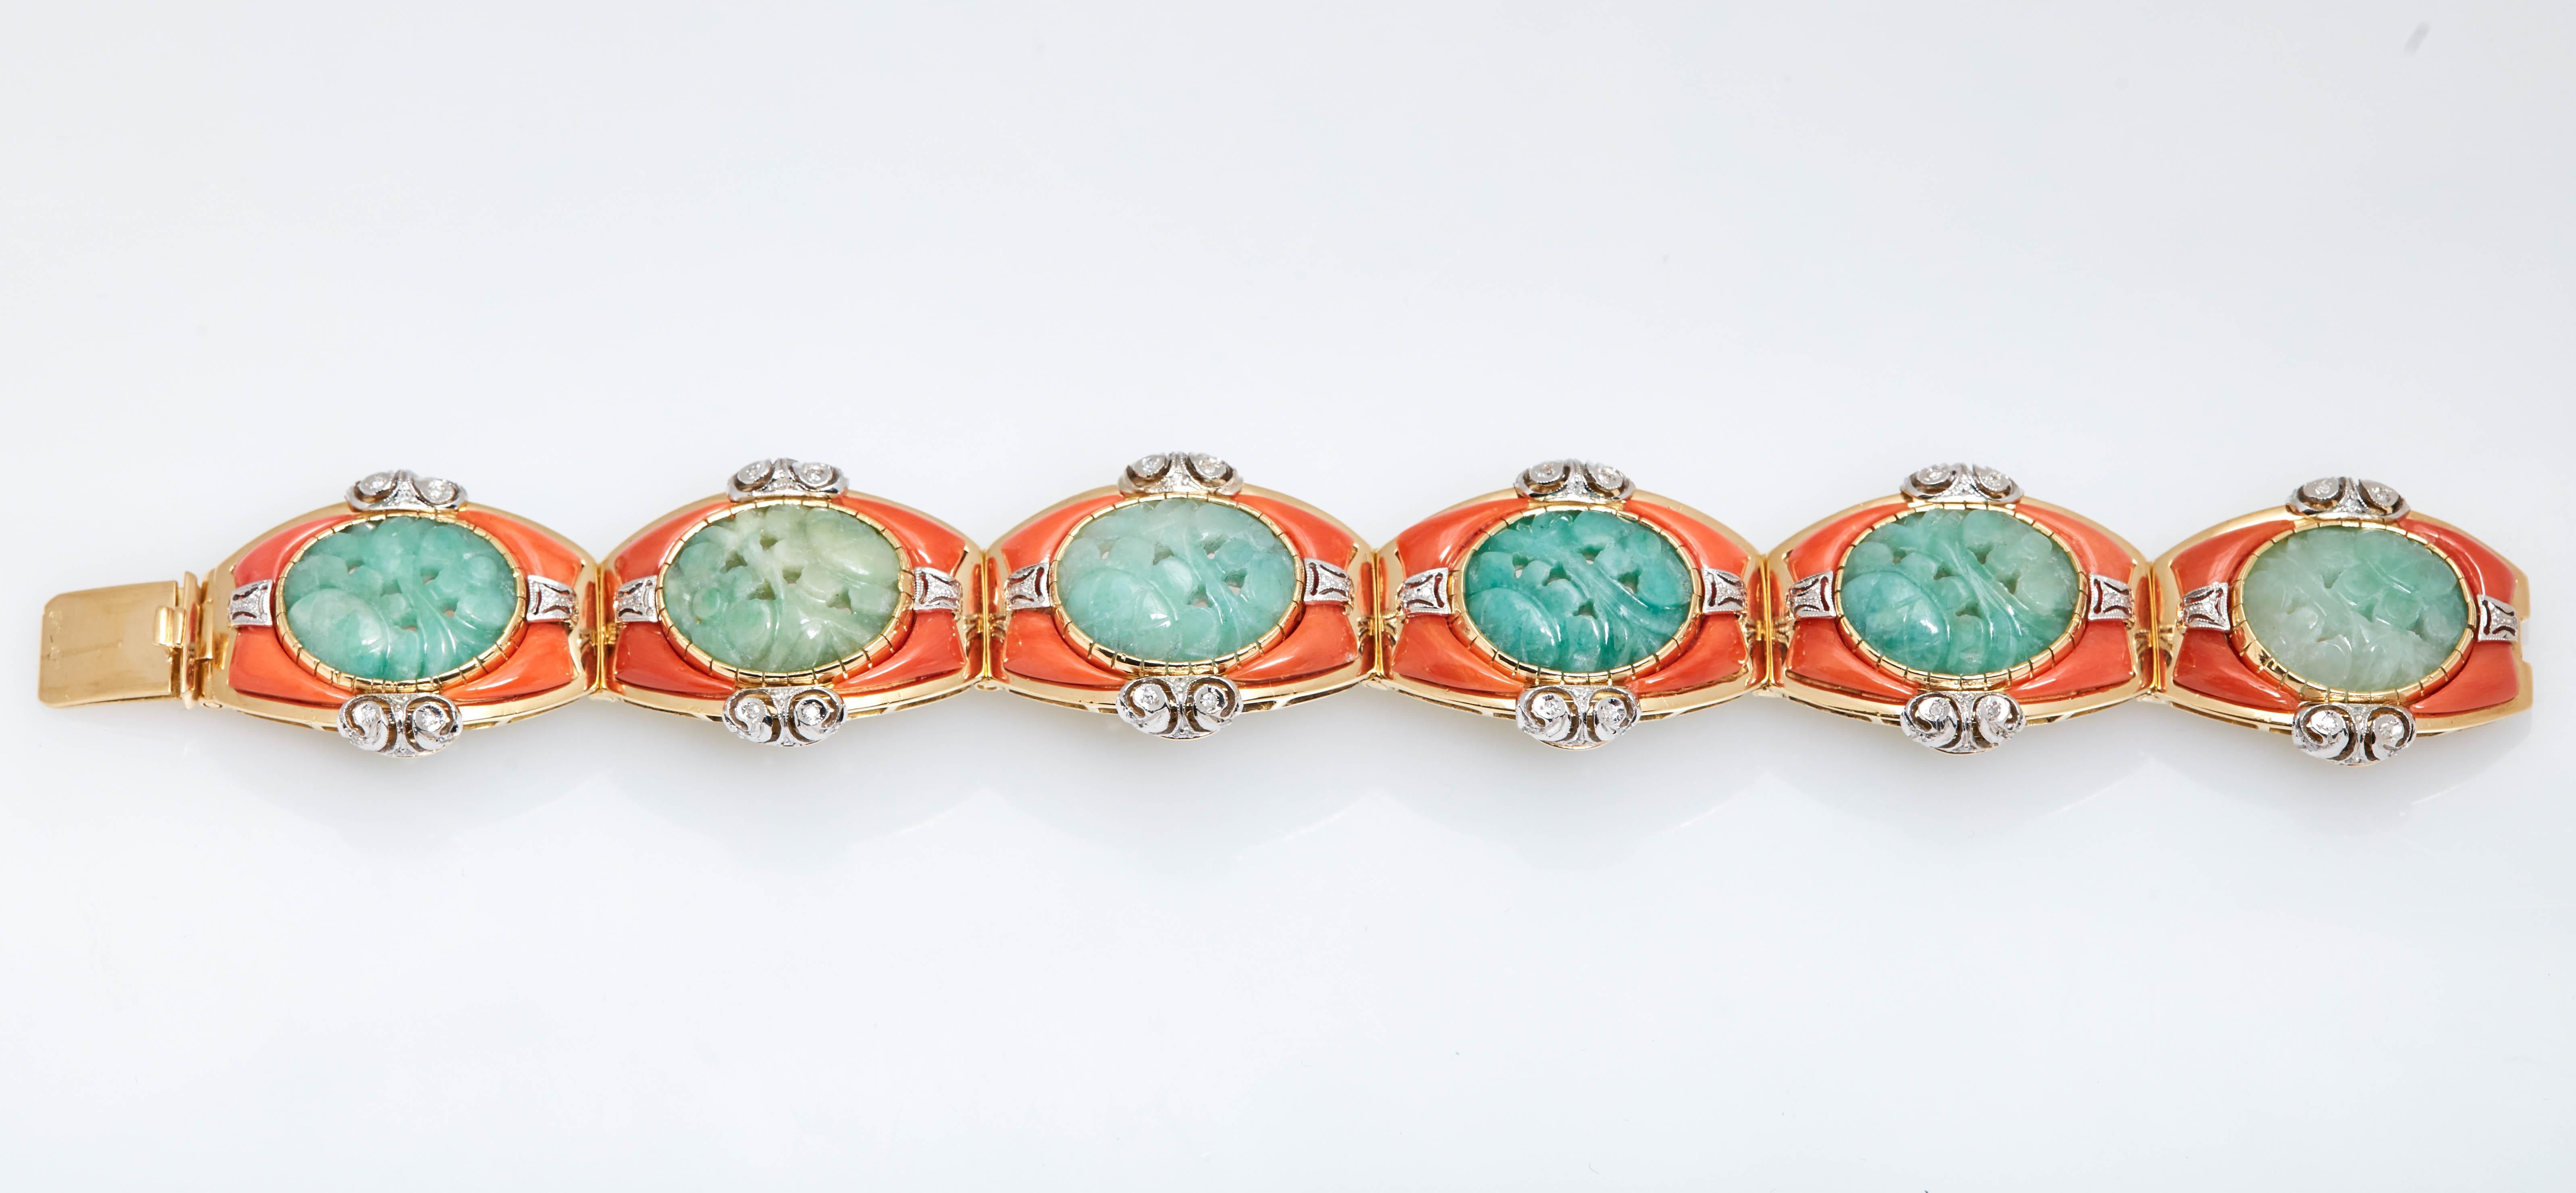 An unusual and refined bracelet in yellow gold with carved jade, corals and diamonds, mounted on 18kt yellow gold. Made in Italy, circa 1955.